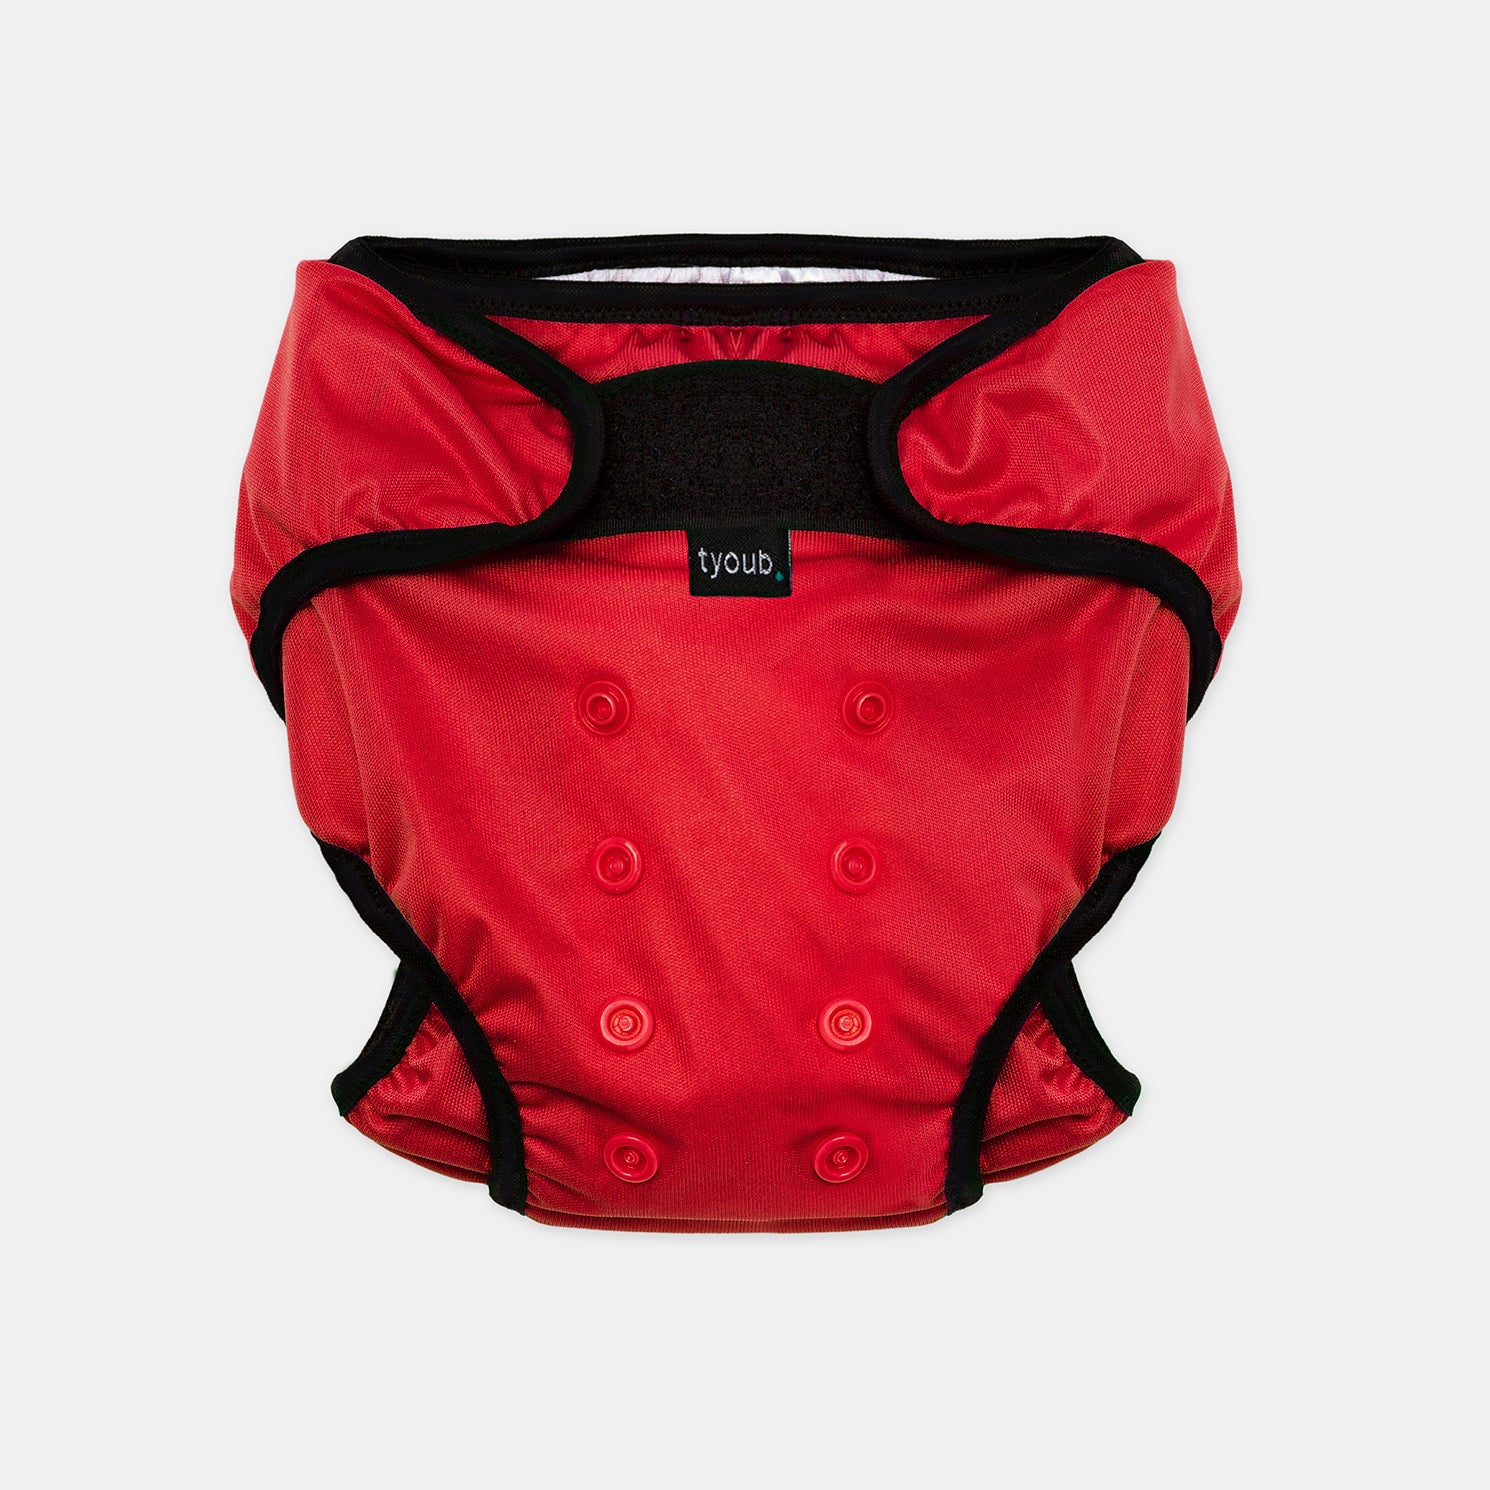 Baby & Toddler, Reusable Swim Nappy + Wet Bag - Red front